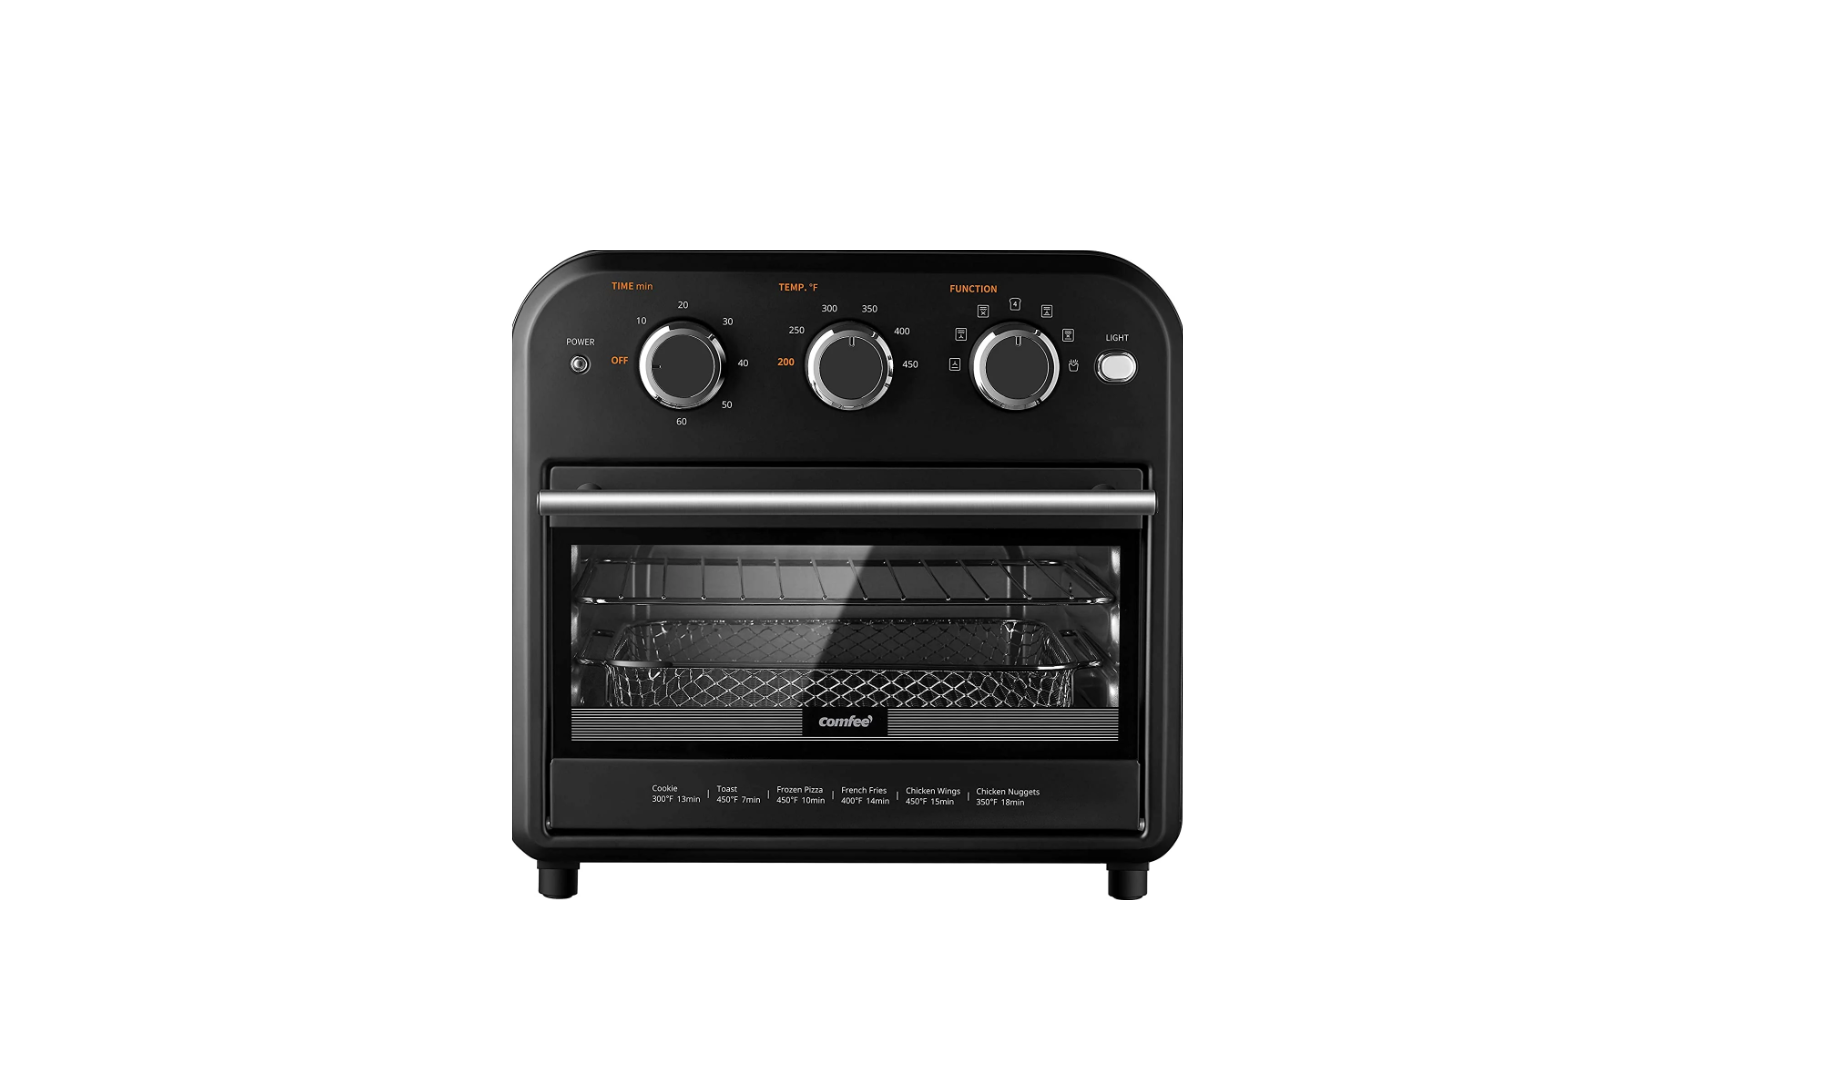 https://manualsclip.com/wp-content/uploads/2023/03/COMFEE-CO-A101A-AIR-Fryer-Oven-featured.png